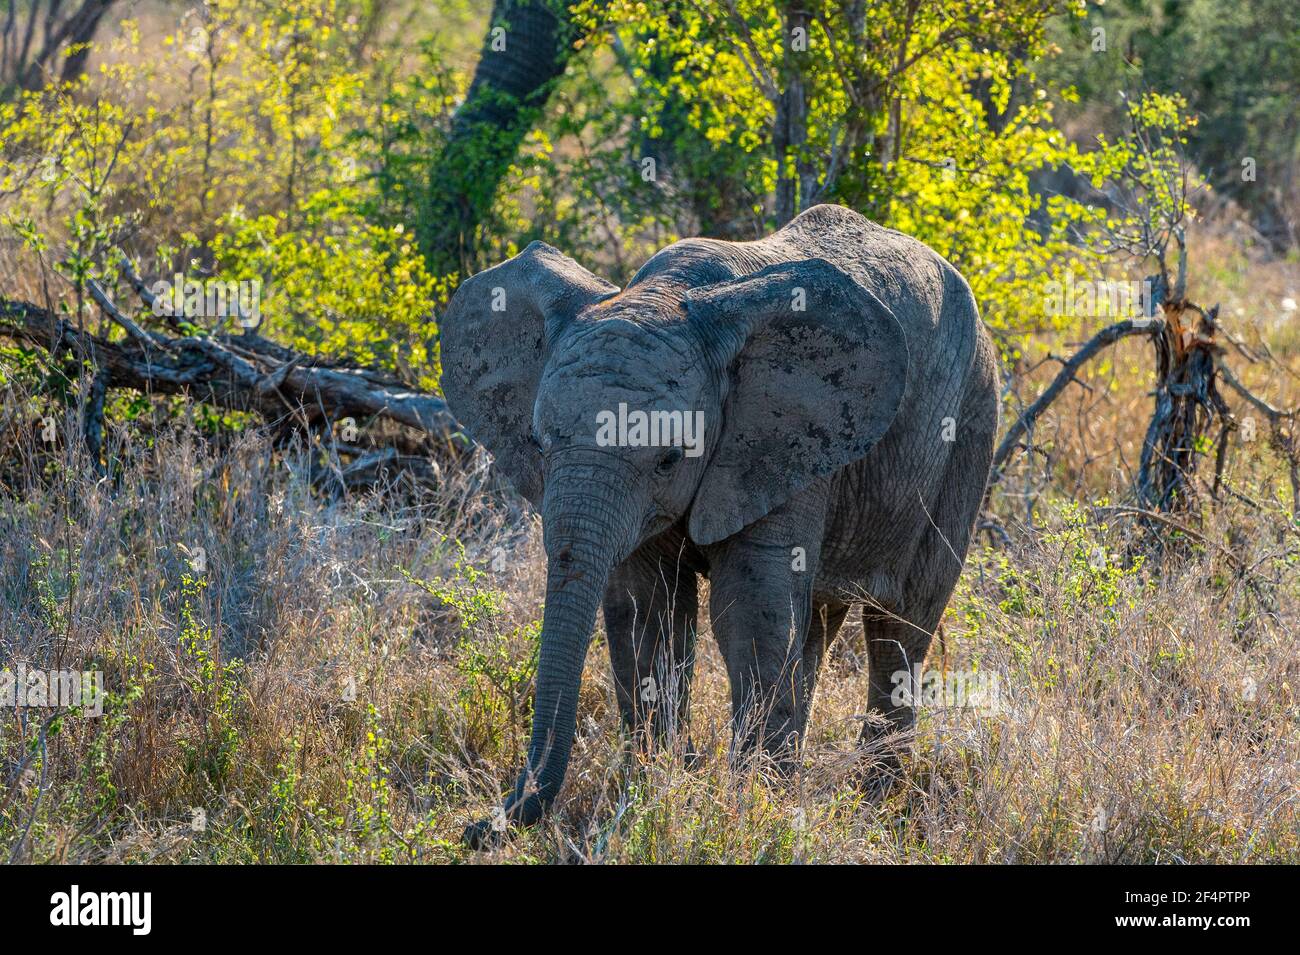 Young African Elephant (Loxodonta africana) relaxed and feeding in Kruger National Park, South Africa. Stock Photo